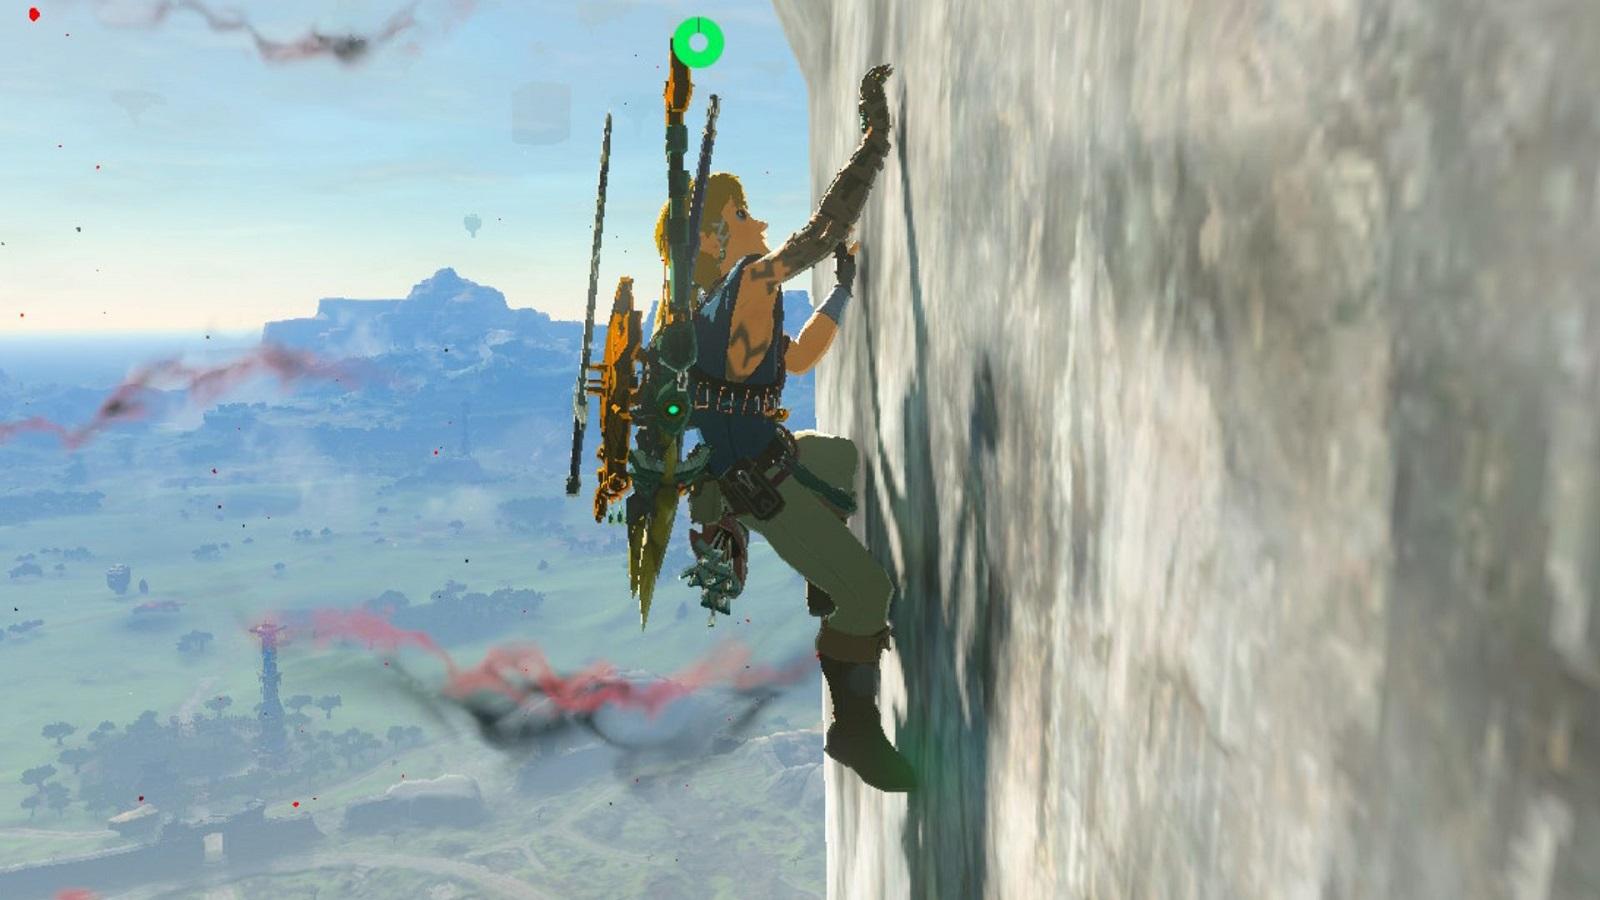 Link climbing a cliff in Tears of the Kingdom